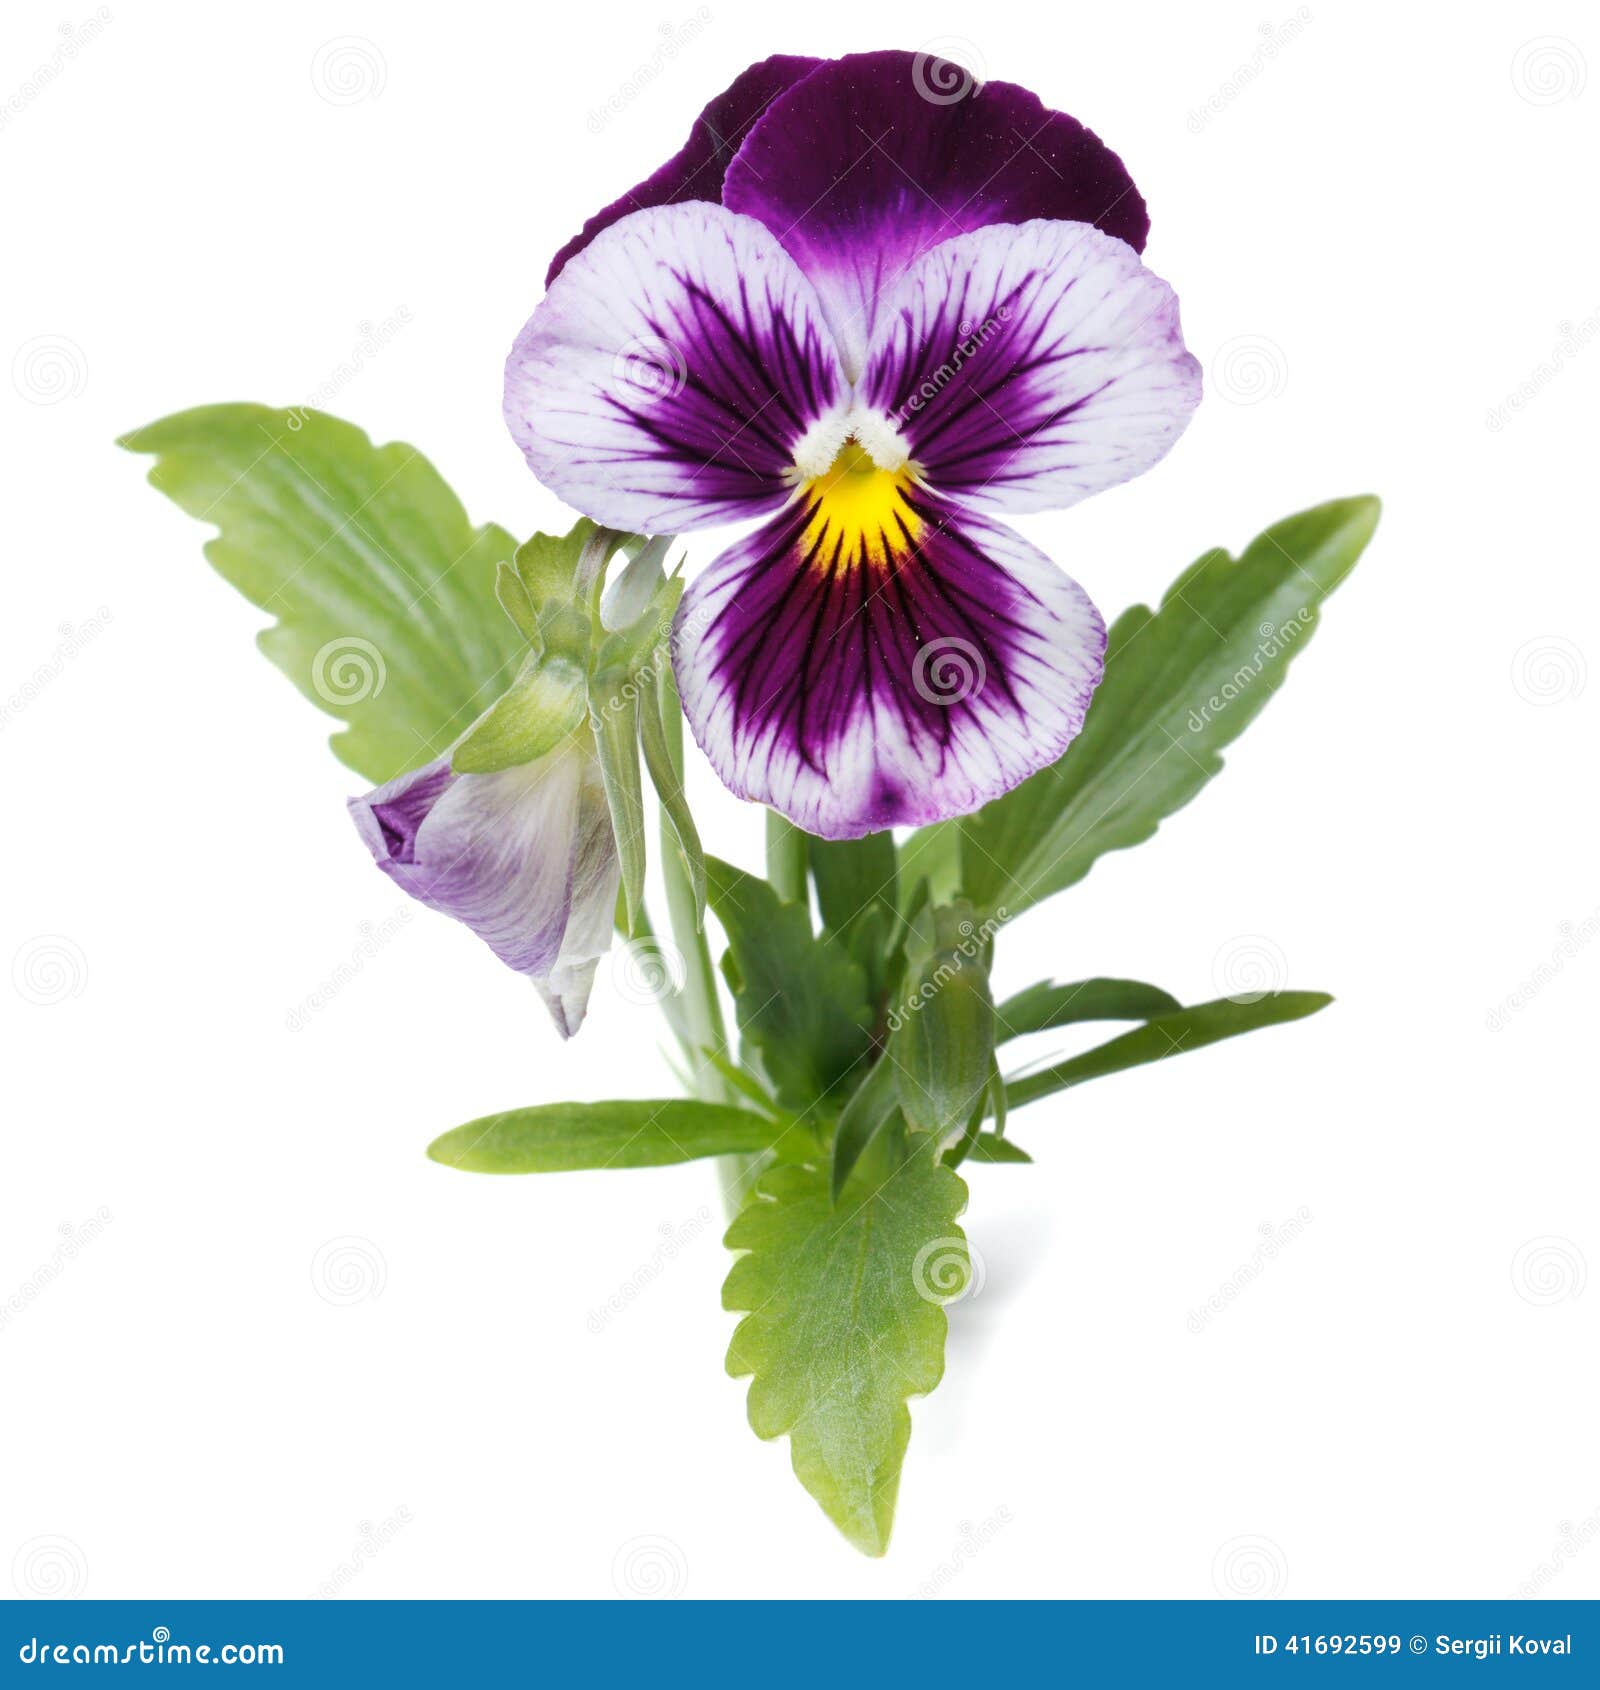 Blue Pansy with a Bud Close-up Isolated Stock Image - Image of blossom ...